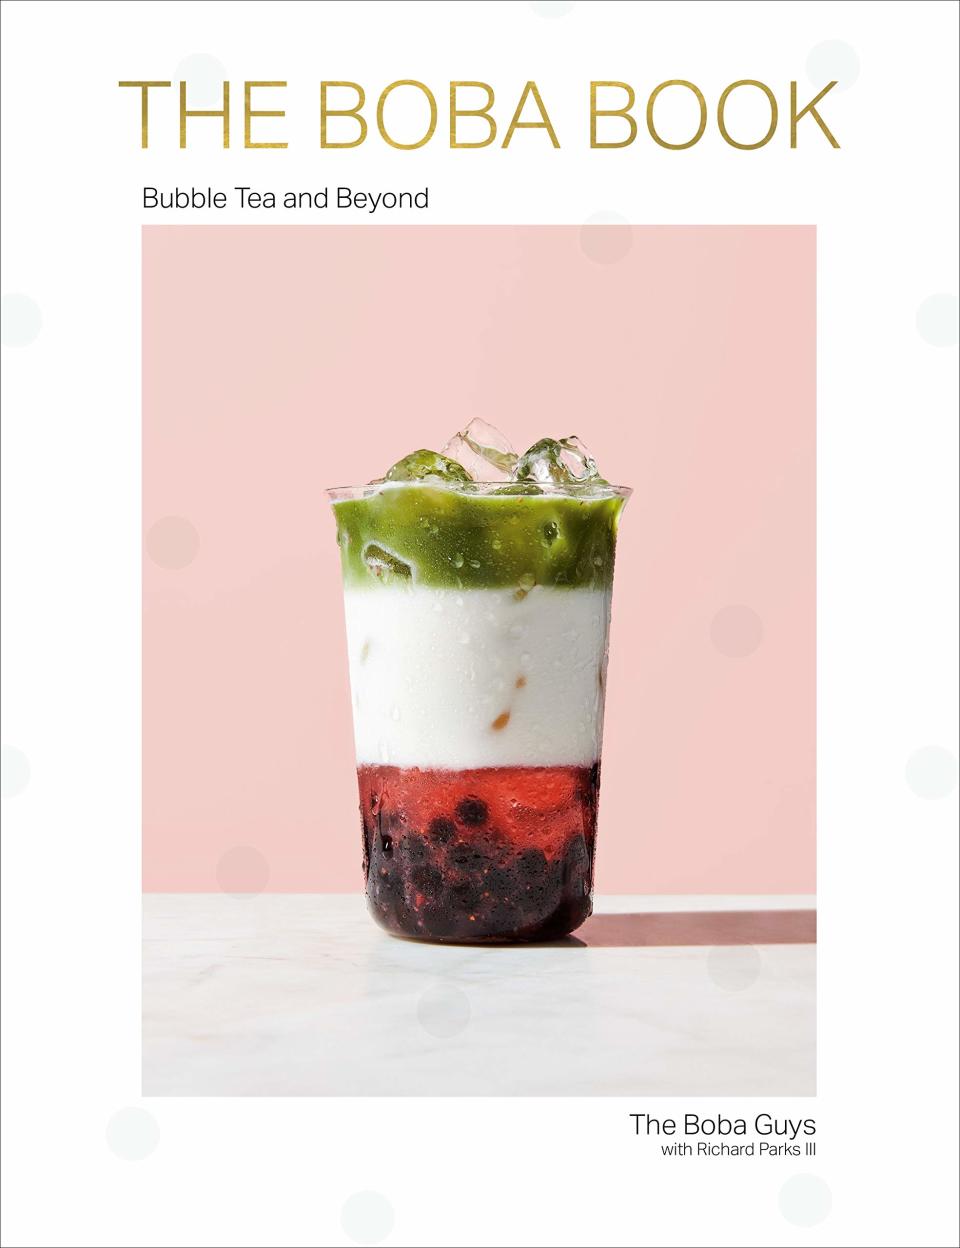 The Boba Book: Bubble Tea and Beyond by Andrew Chau and Bin Chen, about $27 from Amazon. Photo: Amazon.